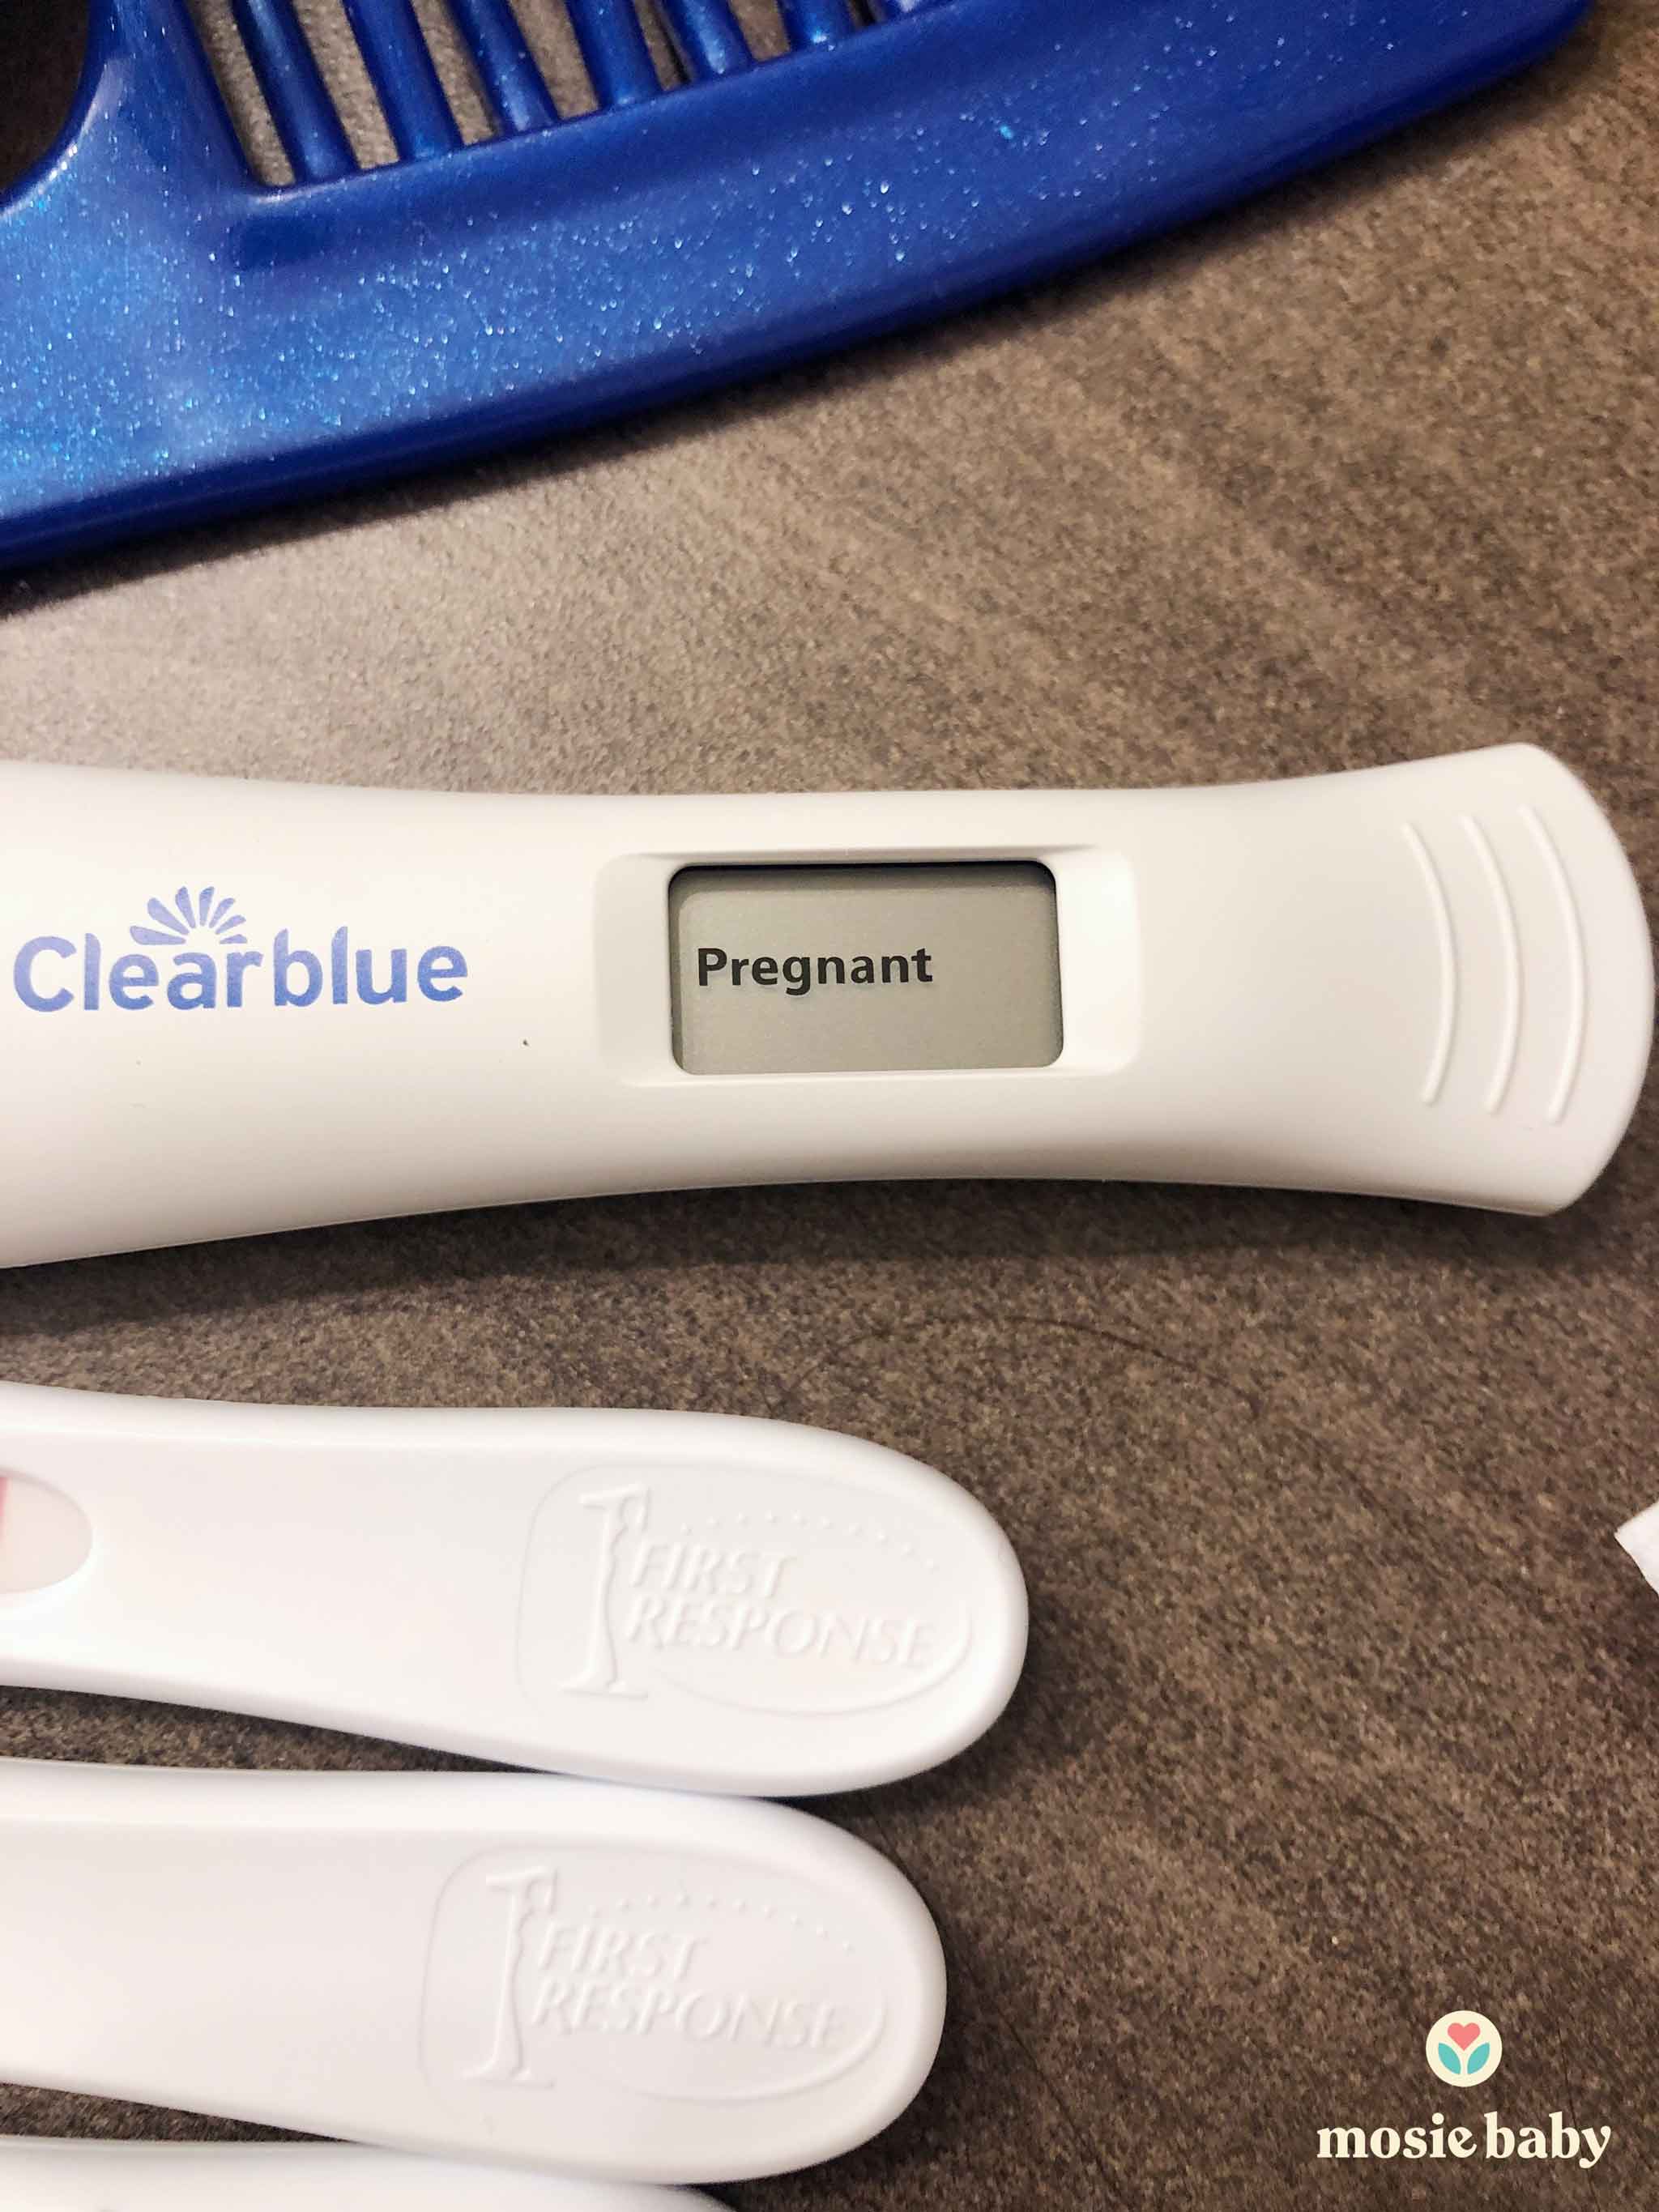 positive pregnancy test from mosie baby user